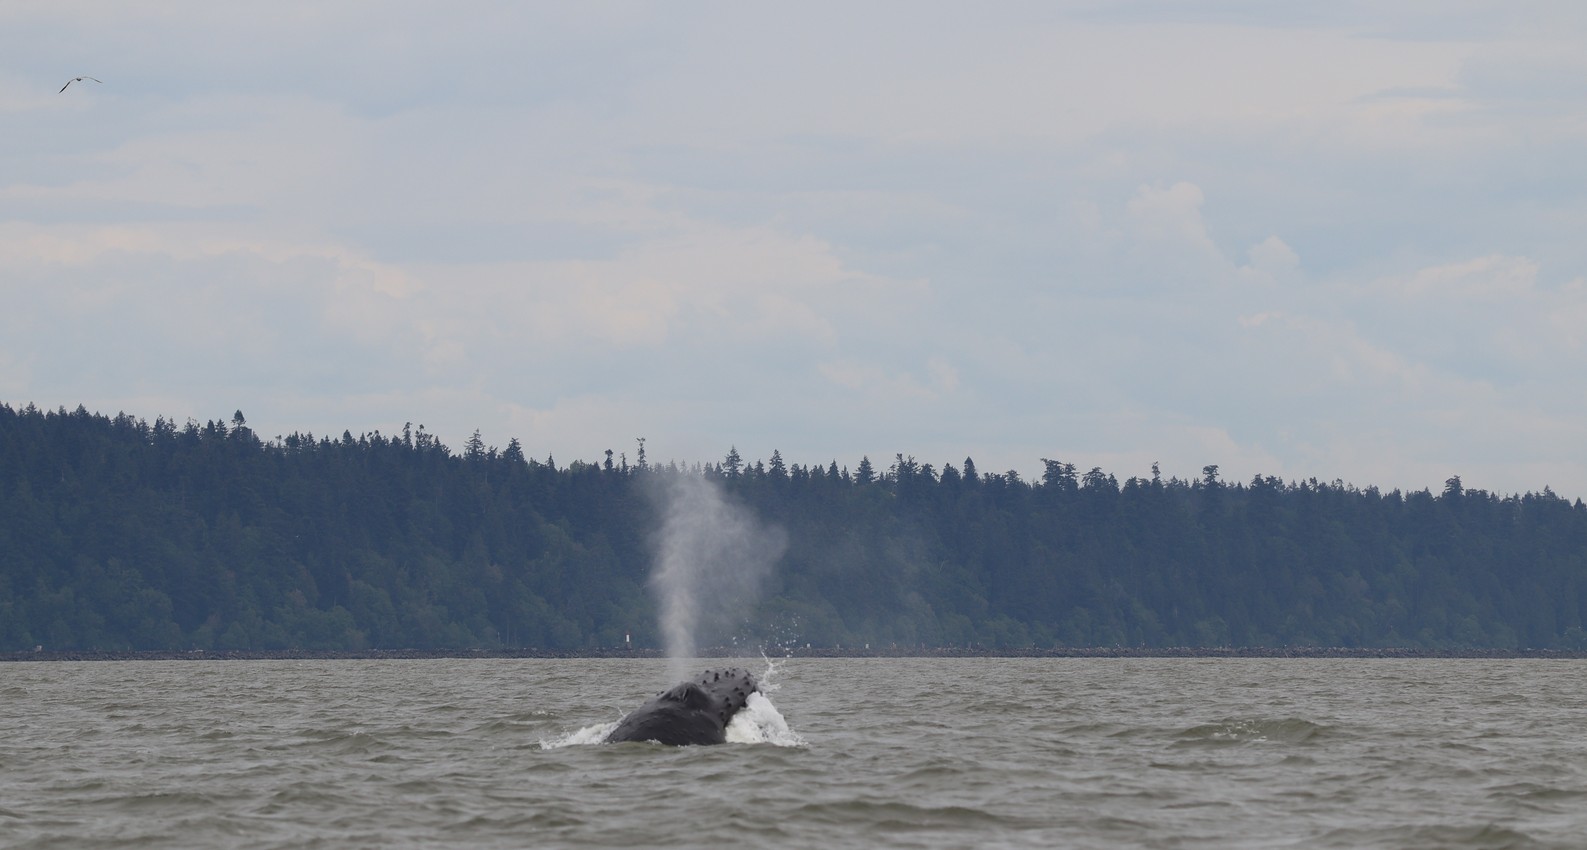 A humpback whale makes a waterspout while feeding